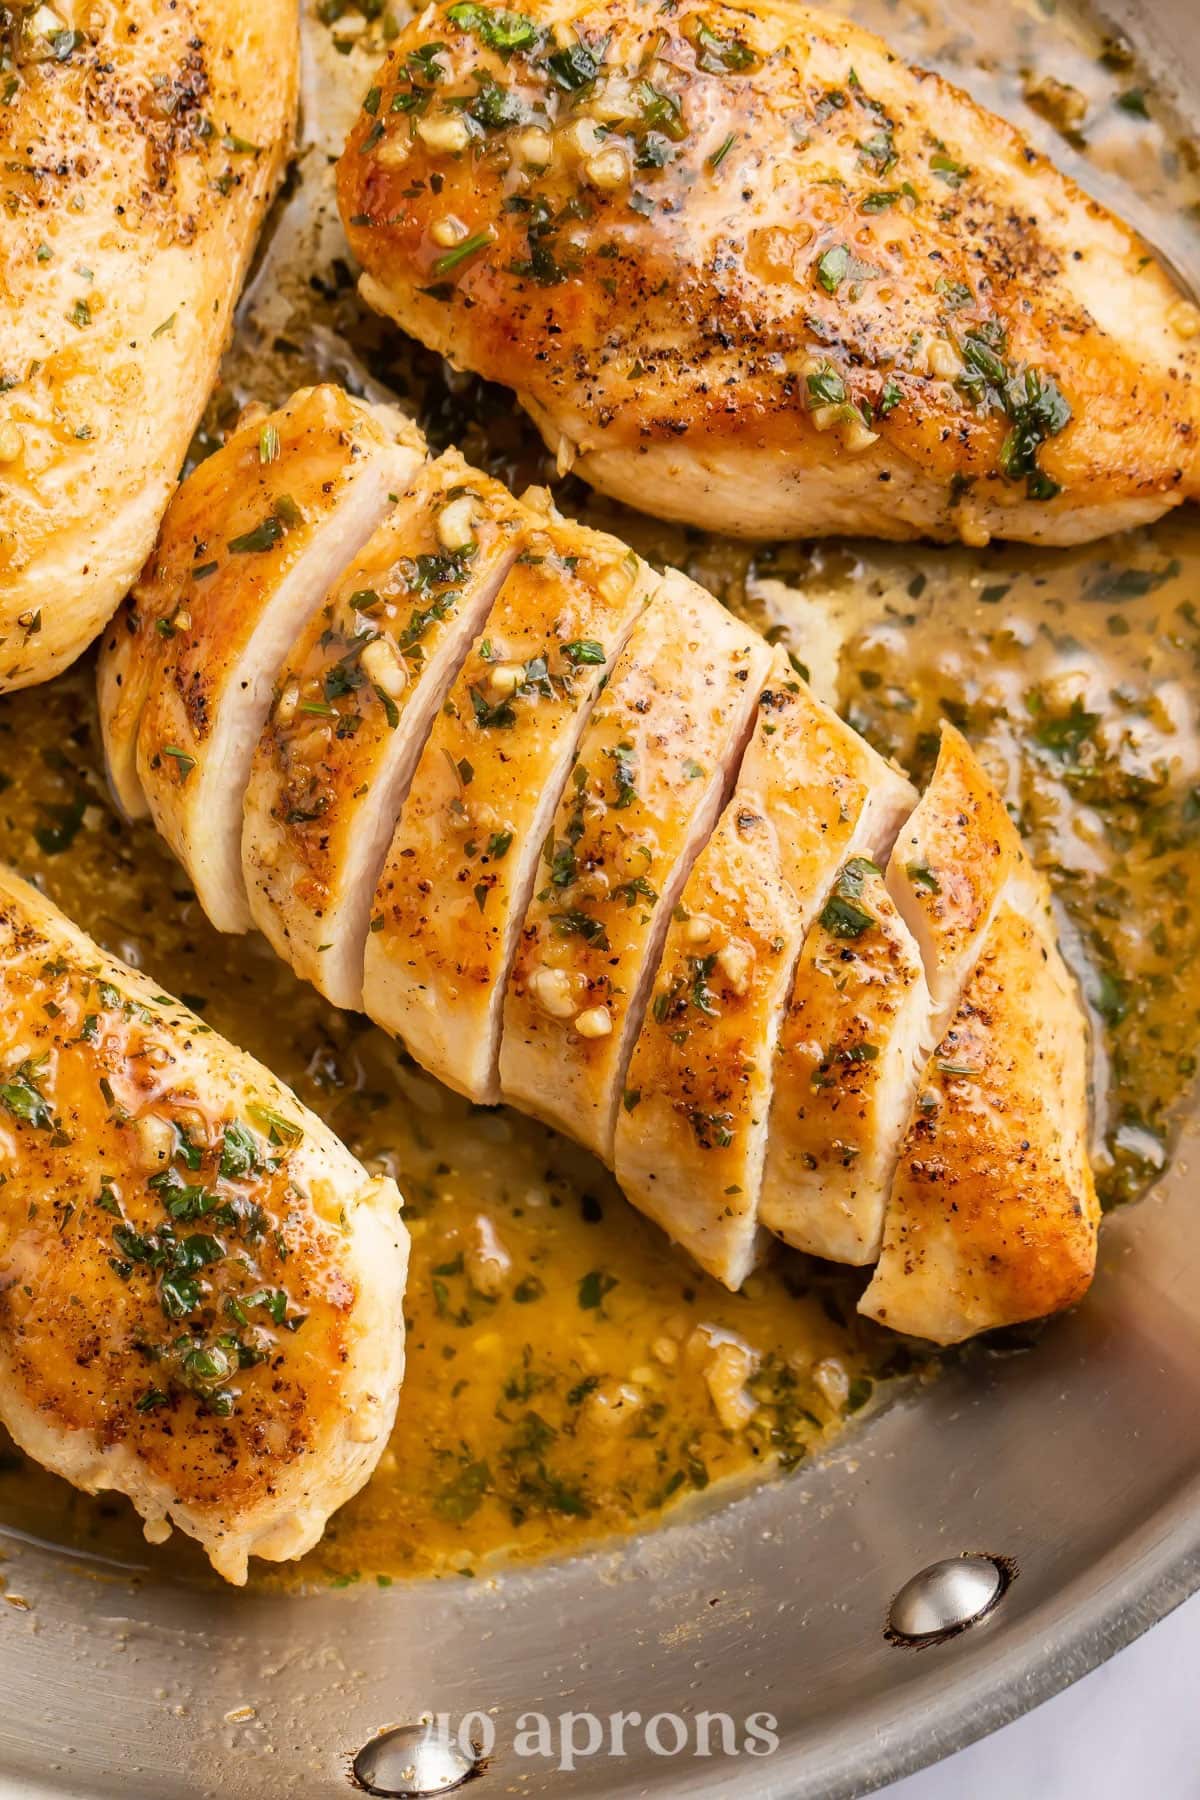 Sliced chicken breast in a large skillet with a garlic butter sauce.